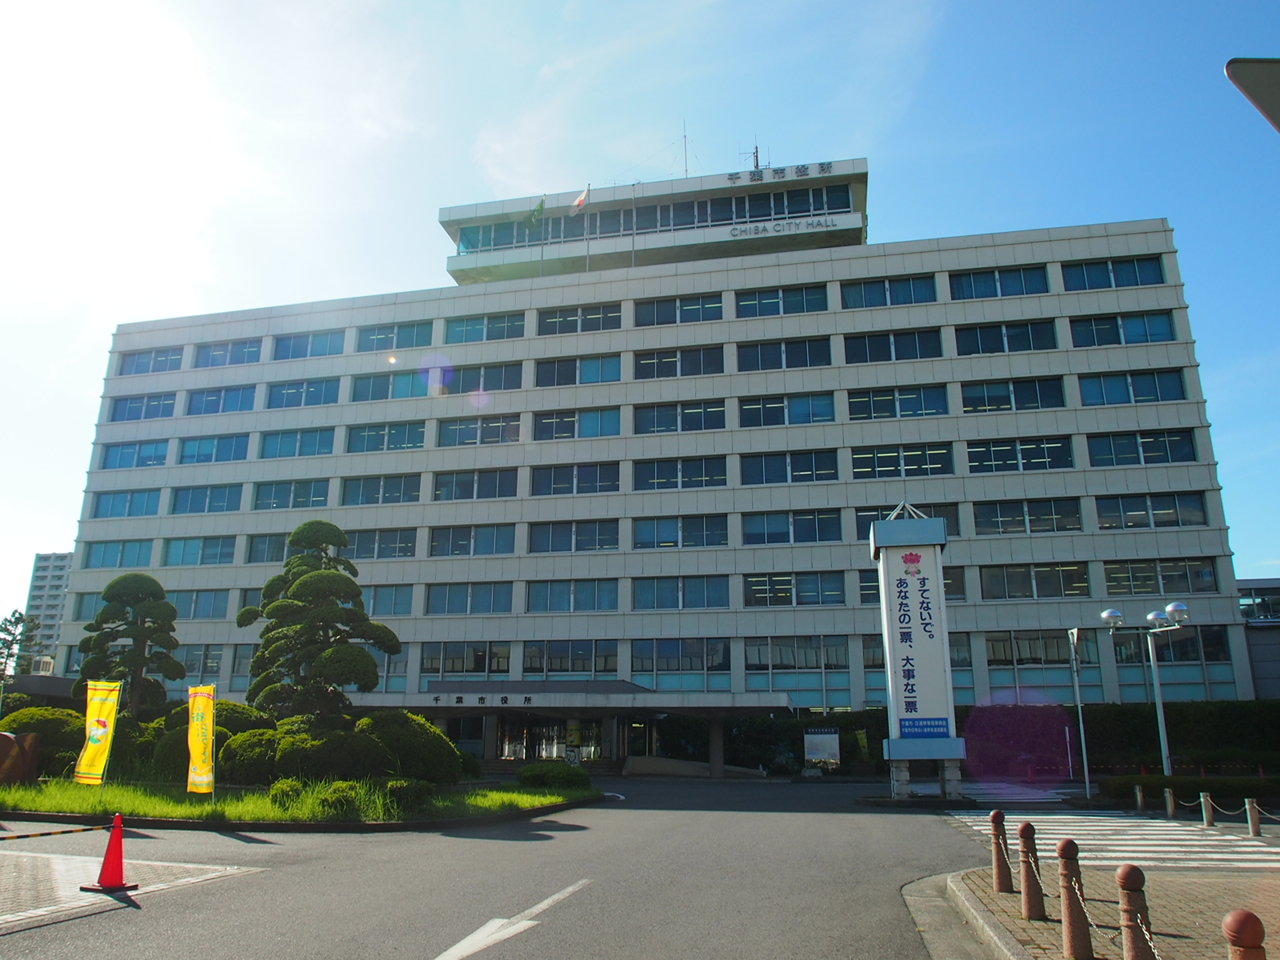 Government office. 995m to Chiba City Hall (government office)